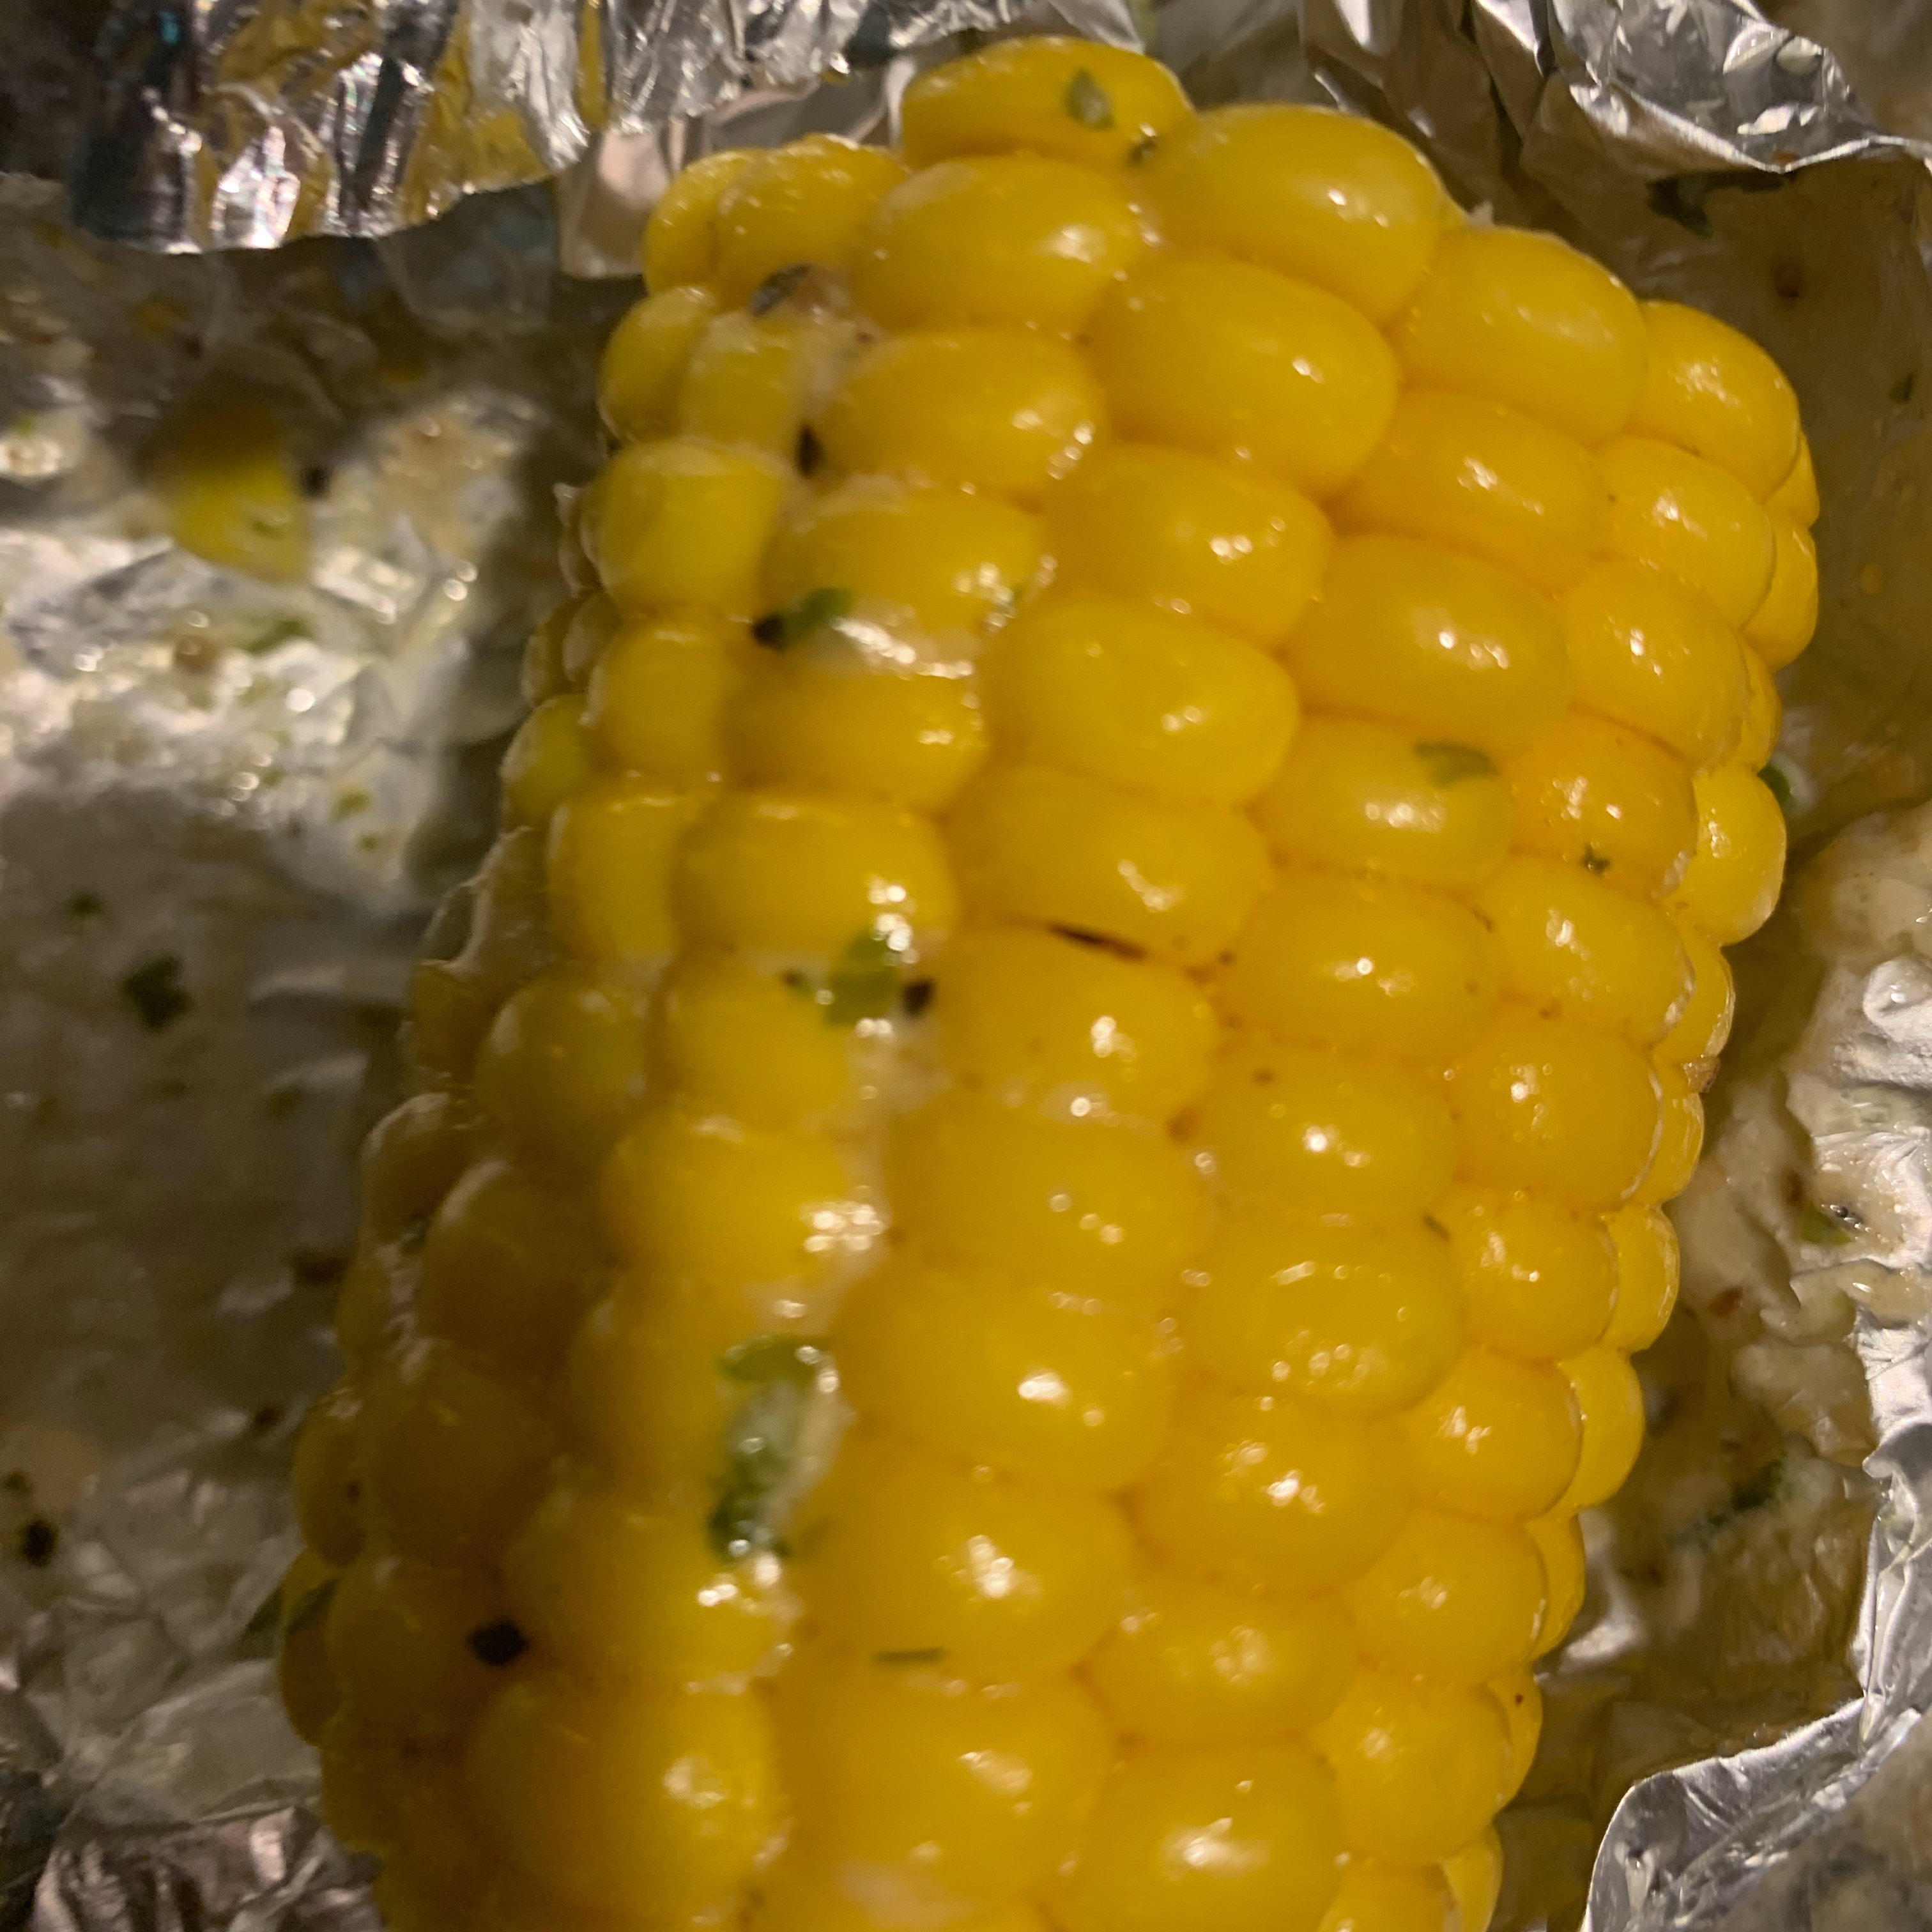 Oven Roasted Parmesan Corn on the Cob Zzzzz